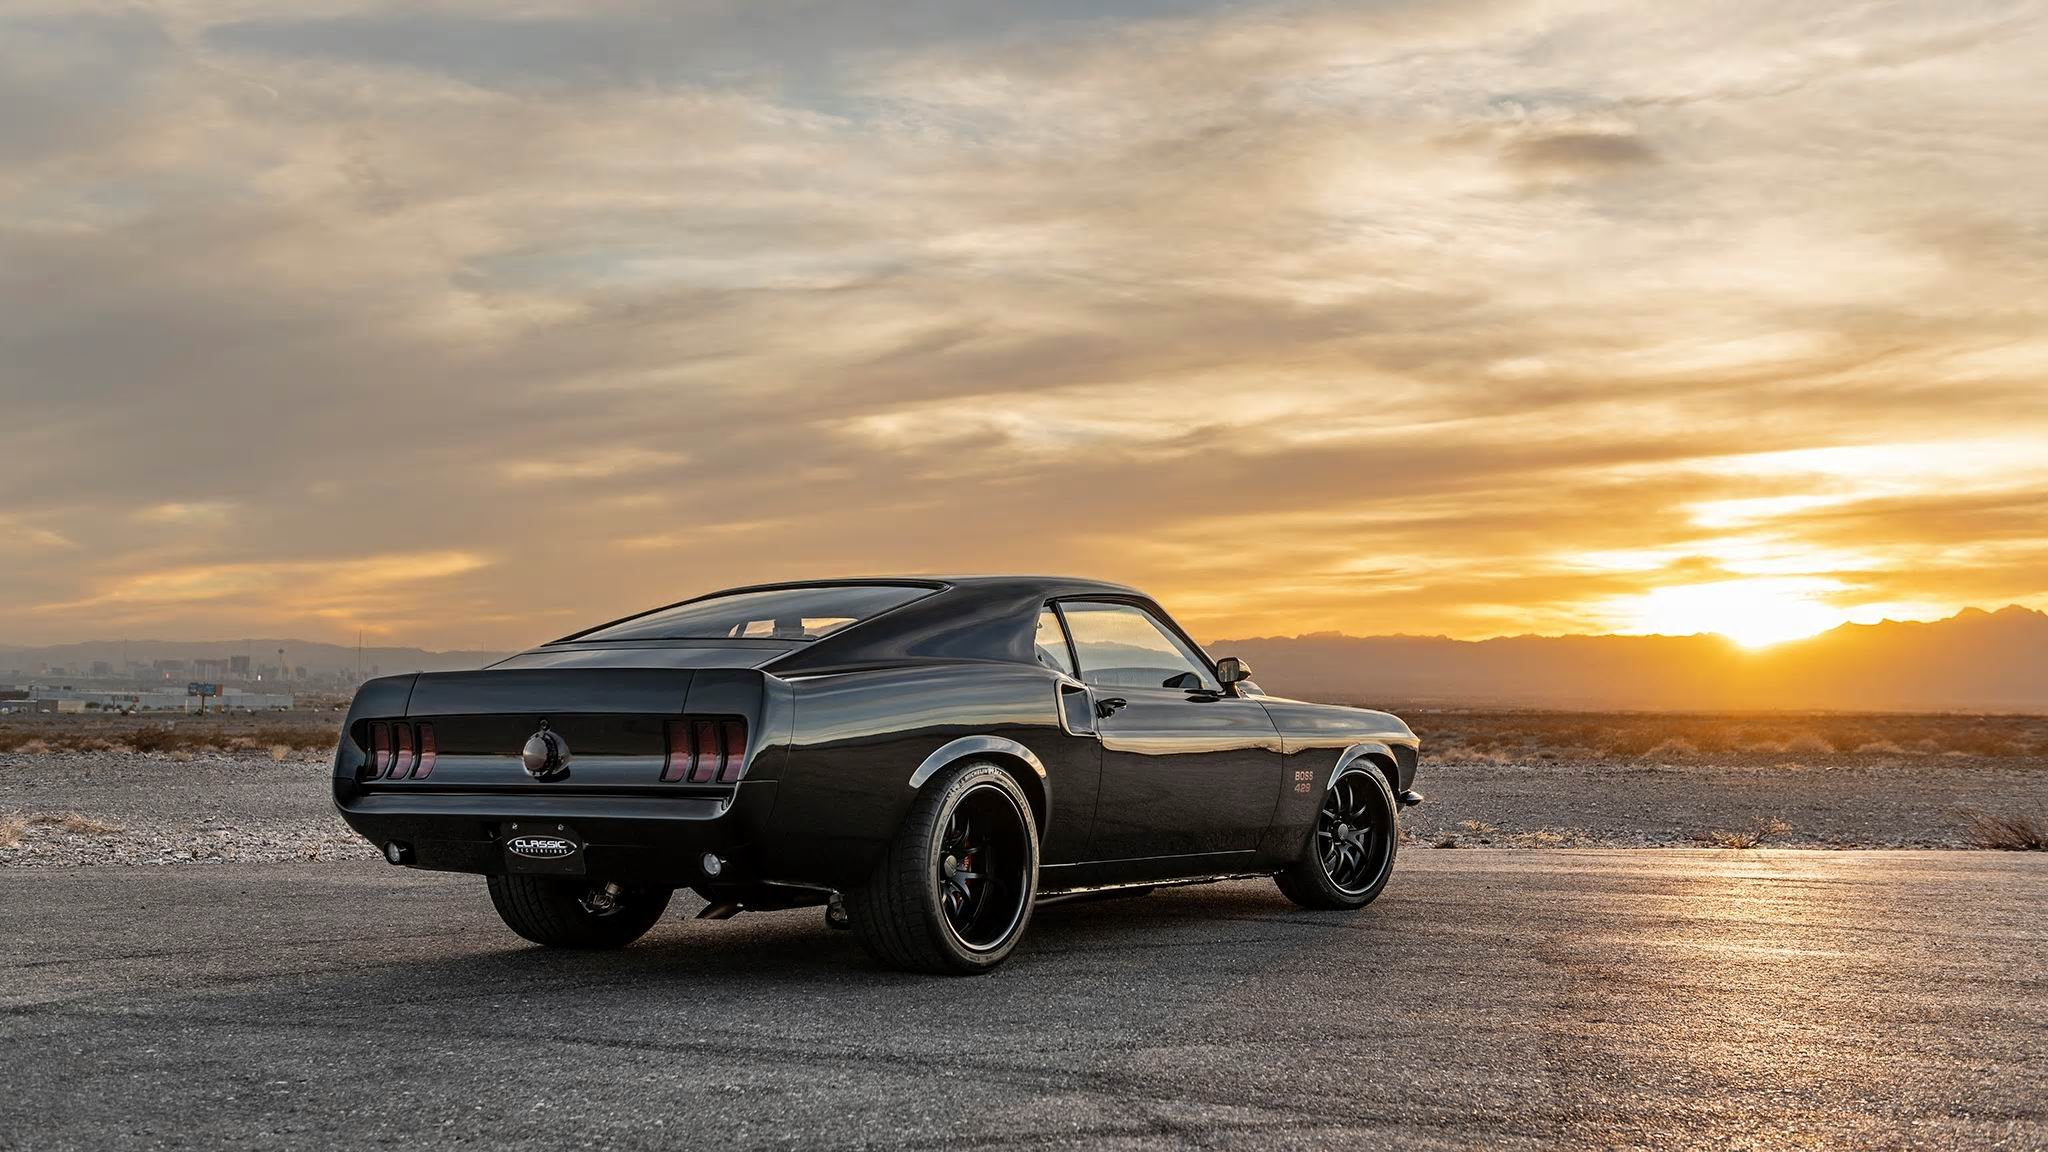 1969 Ford Mustang Boss 429 HD Wallpaper Background Image